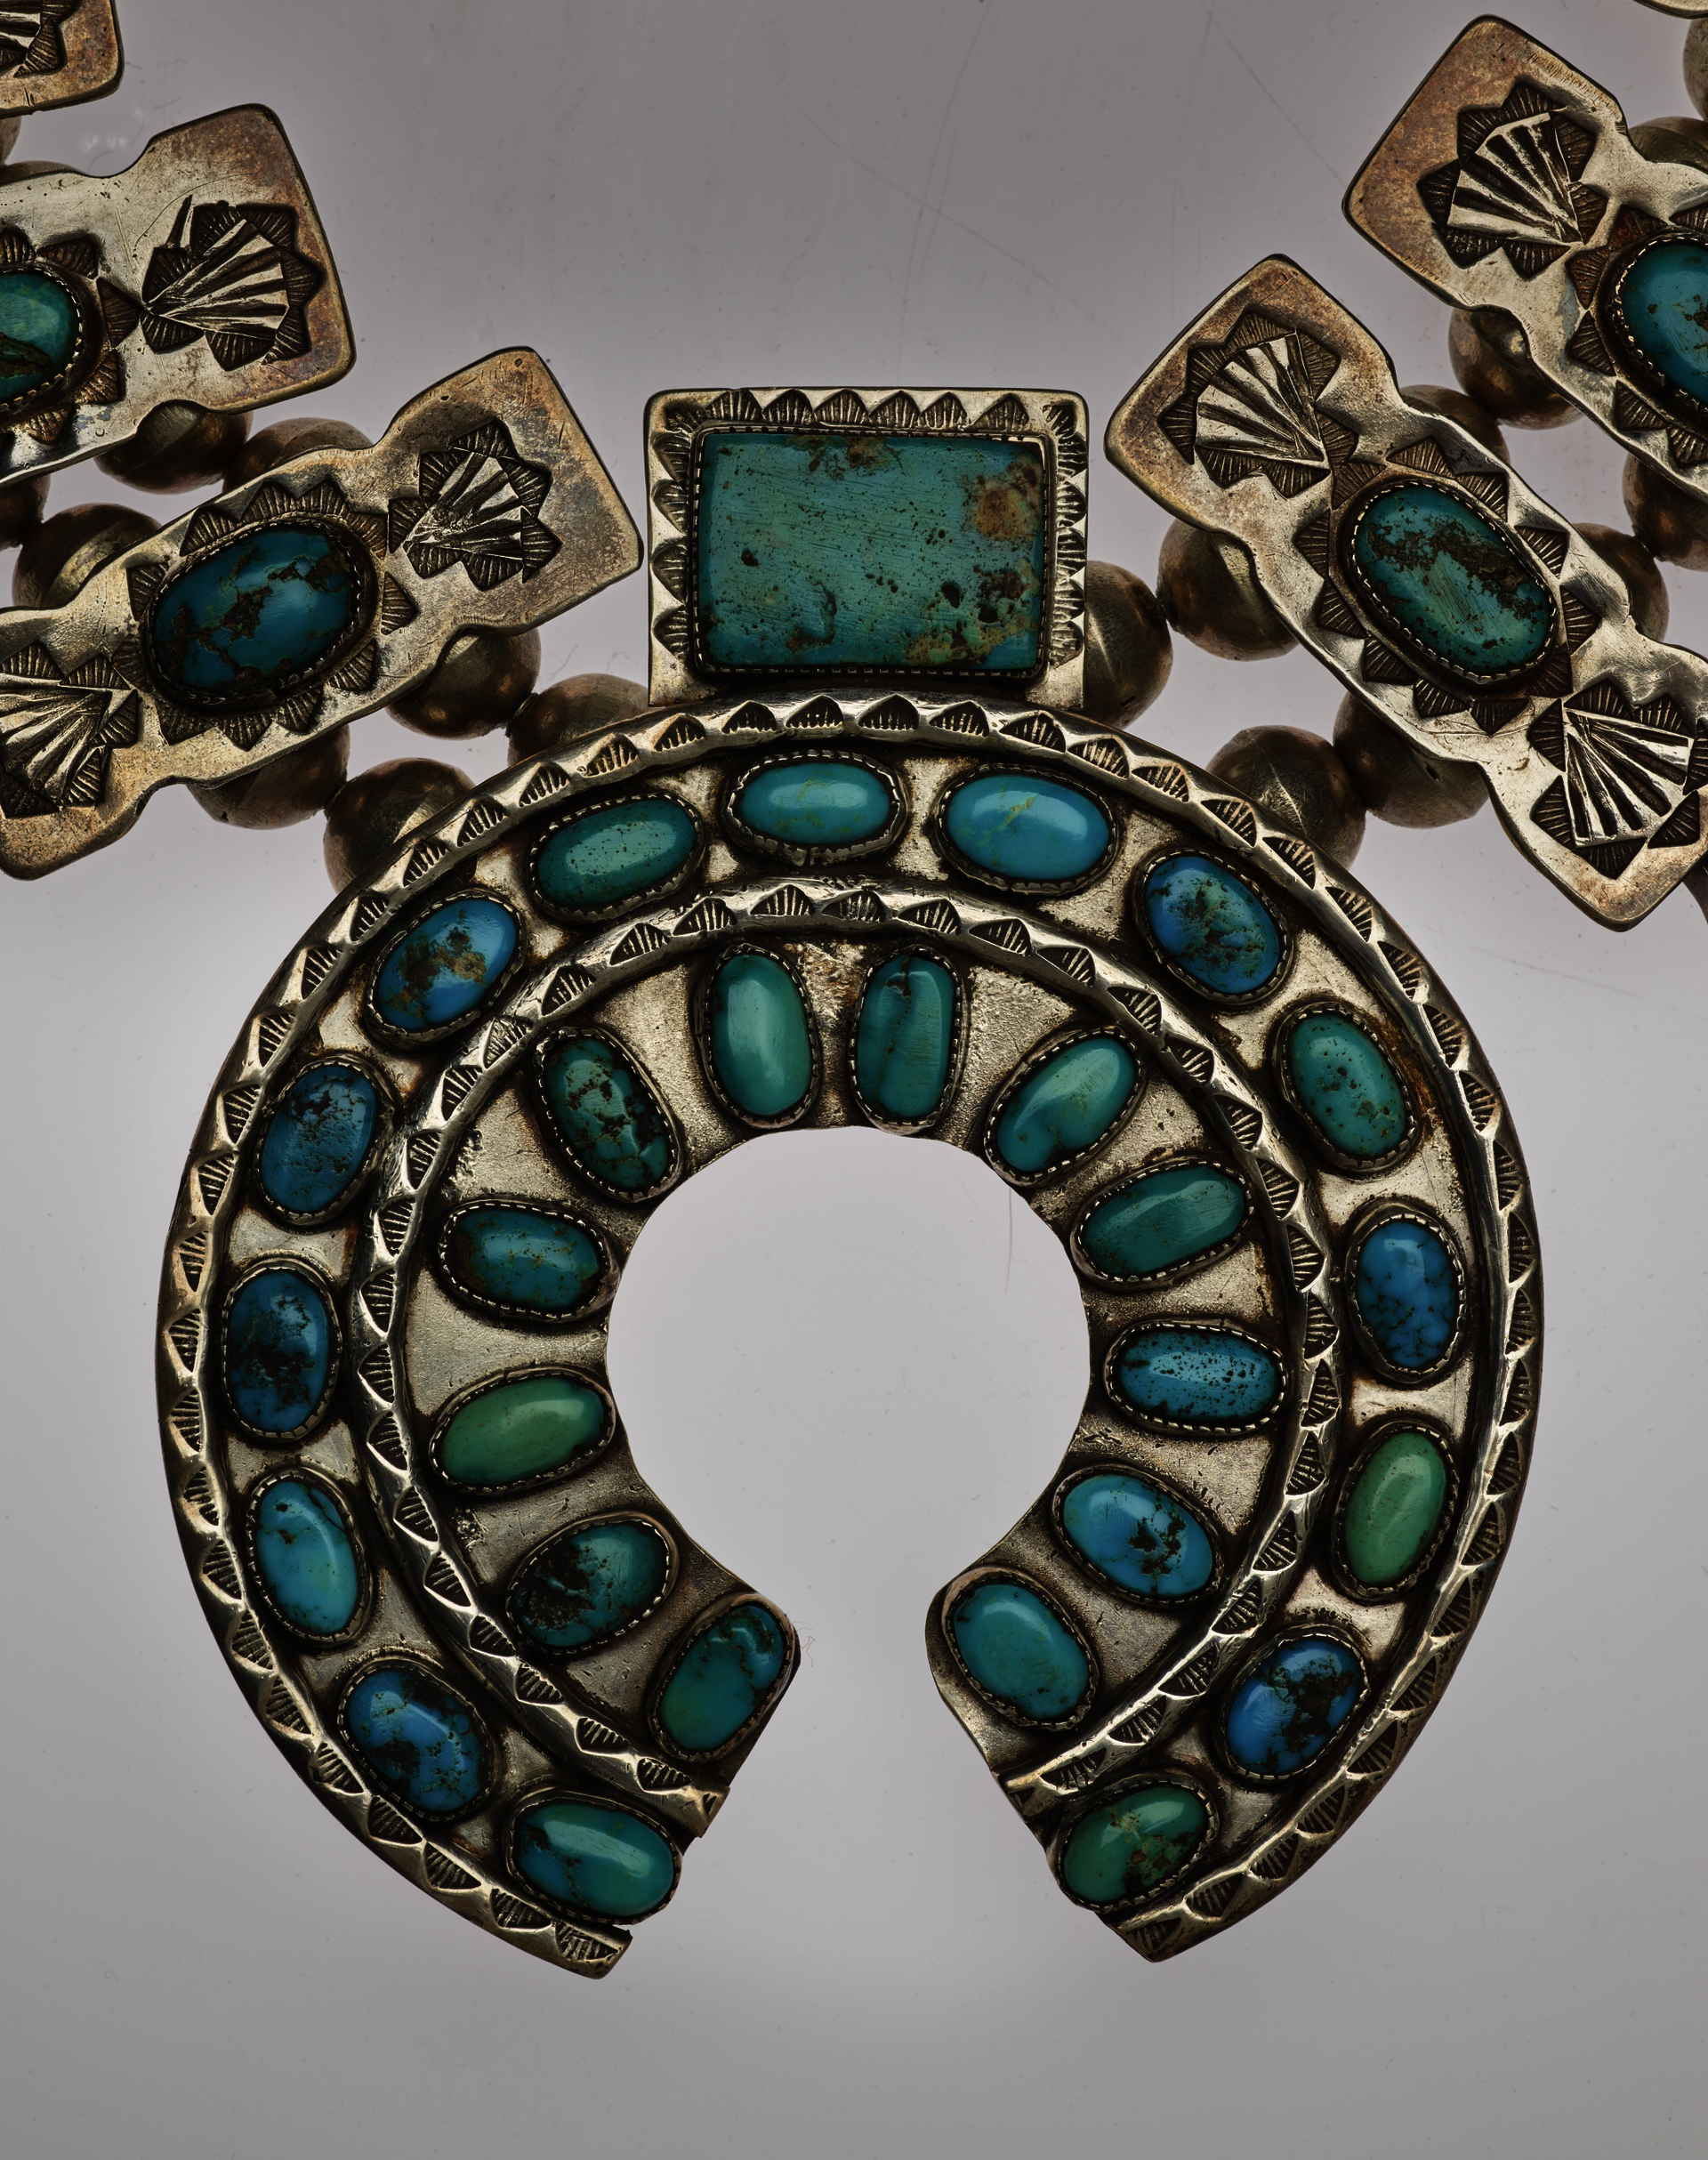 Detail-view of a horseshoe-shaped pendant of a turquoise and silver necklace. The turquoise stones are set in two concentric circles with decorative silver borders with a rectangular stone-setting atop it.